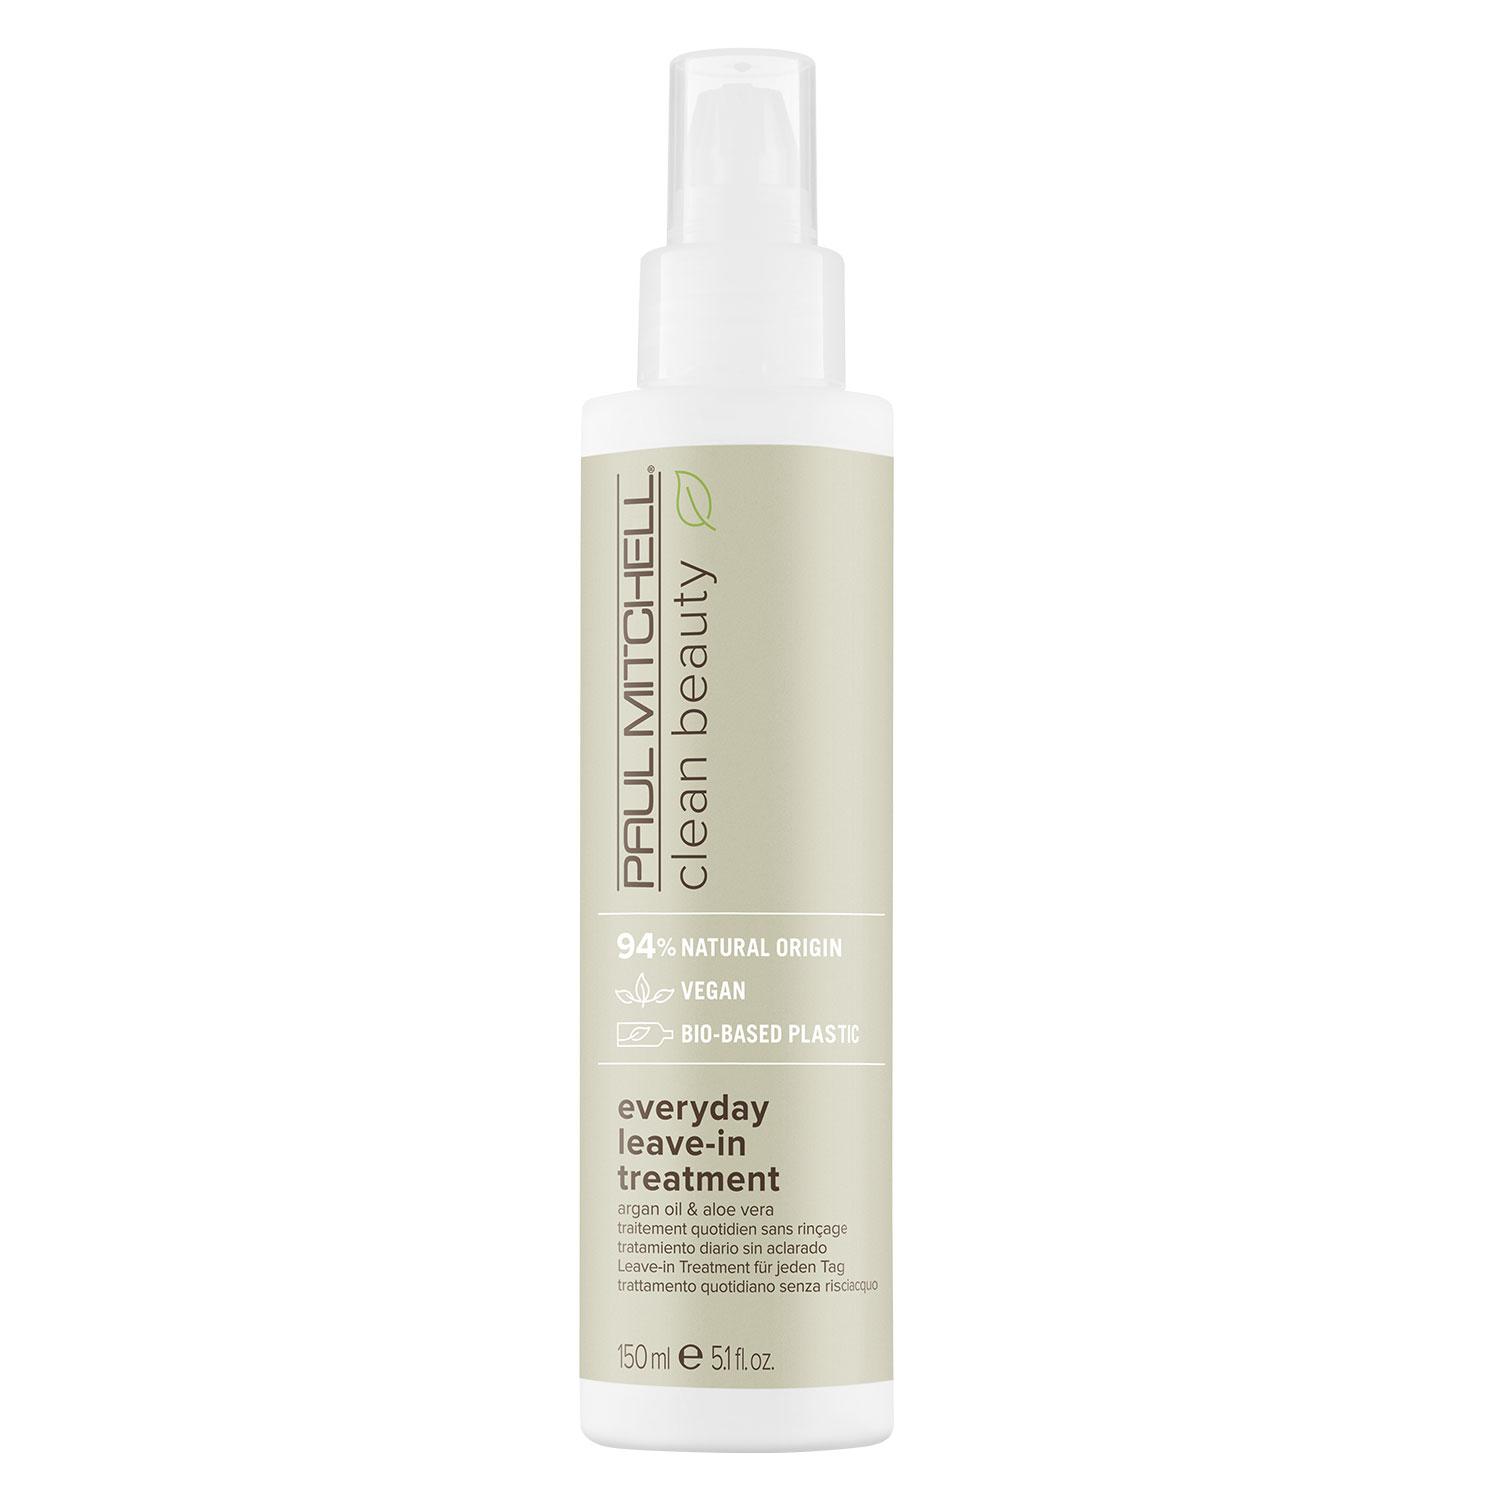 Paul Mitchell Clean Beauty - Everyday Leave-In Treatment